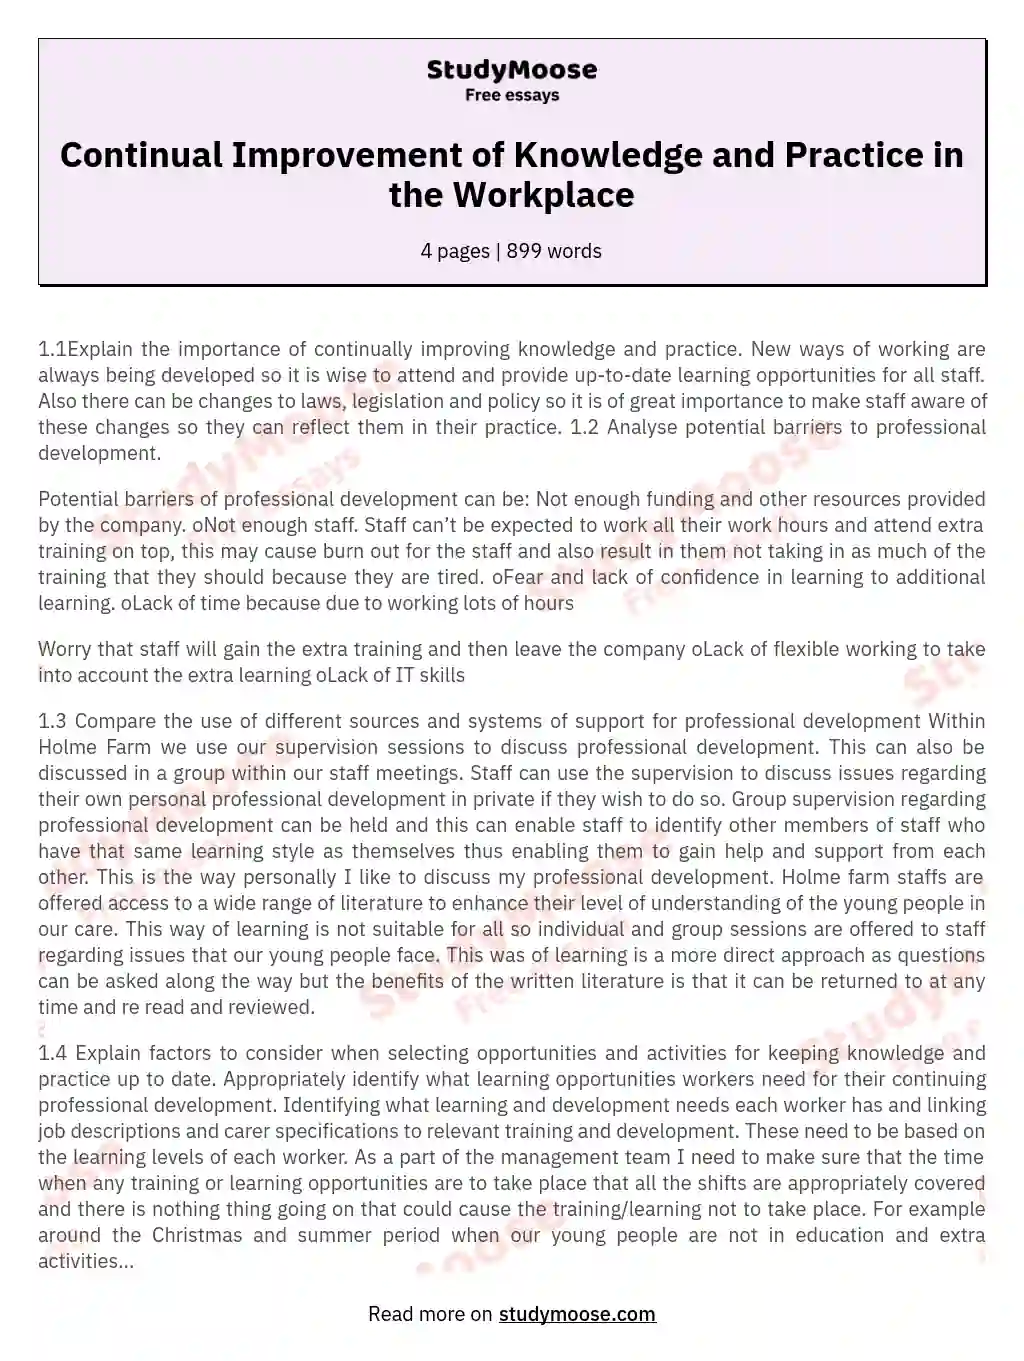 Continual Improvement of Knowledge and Practice in the Workplace essay